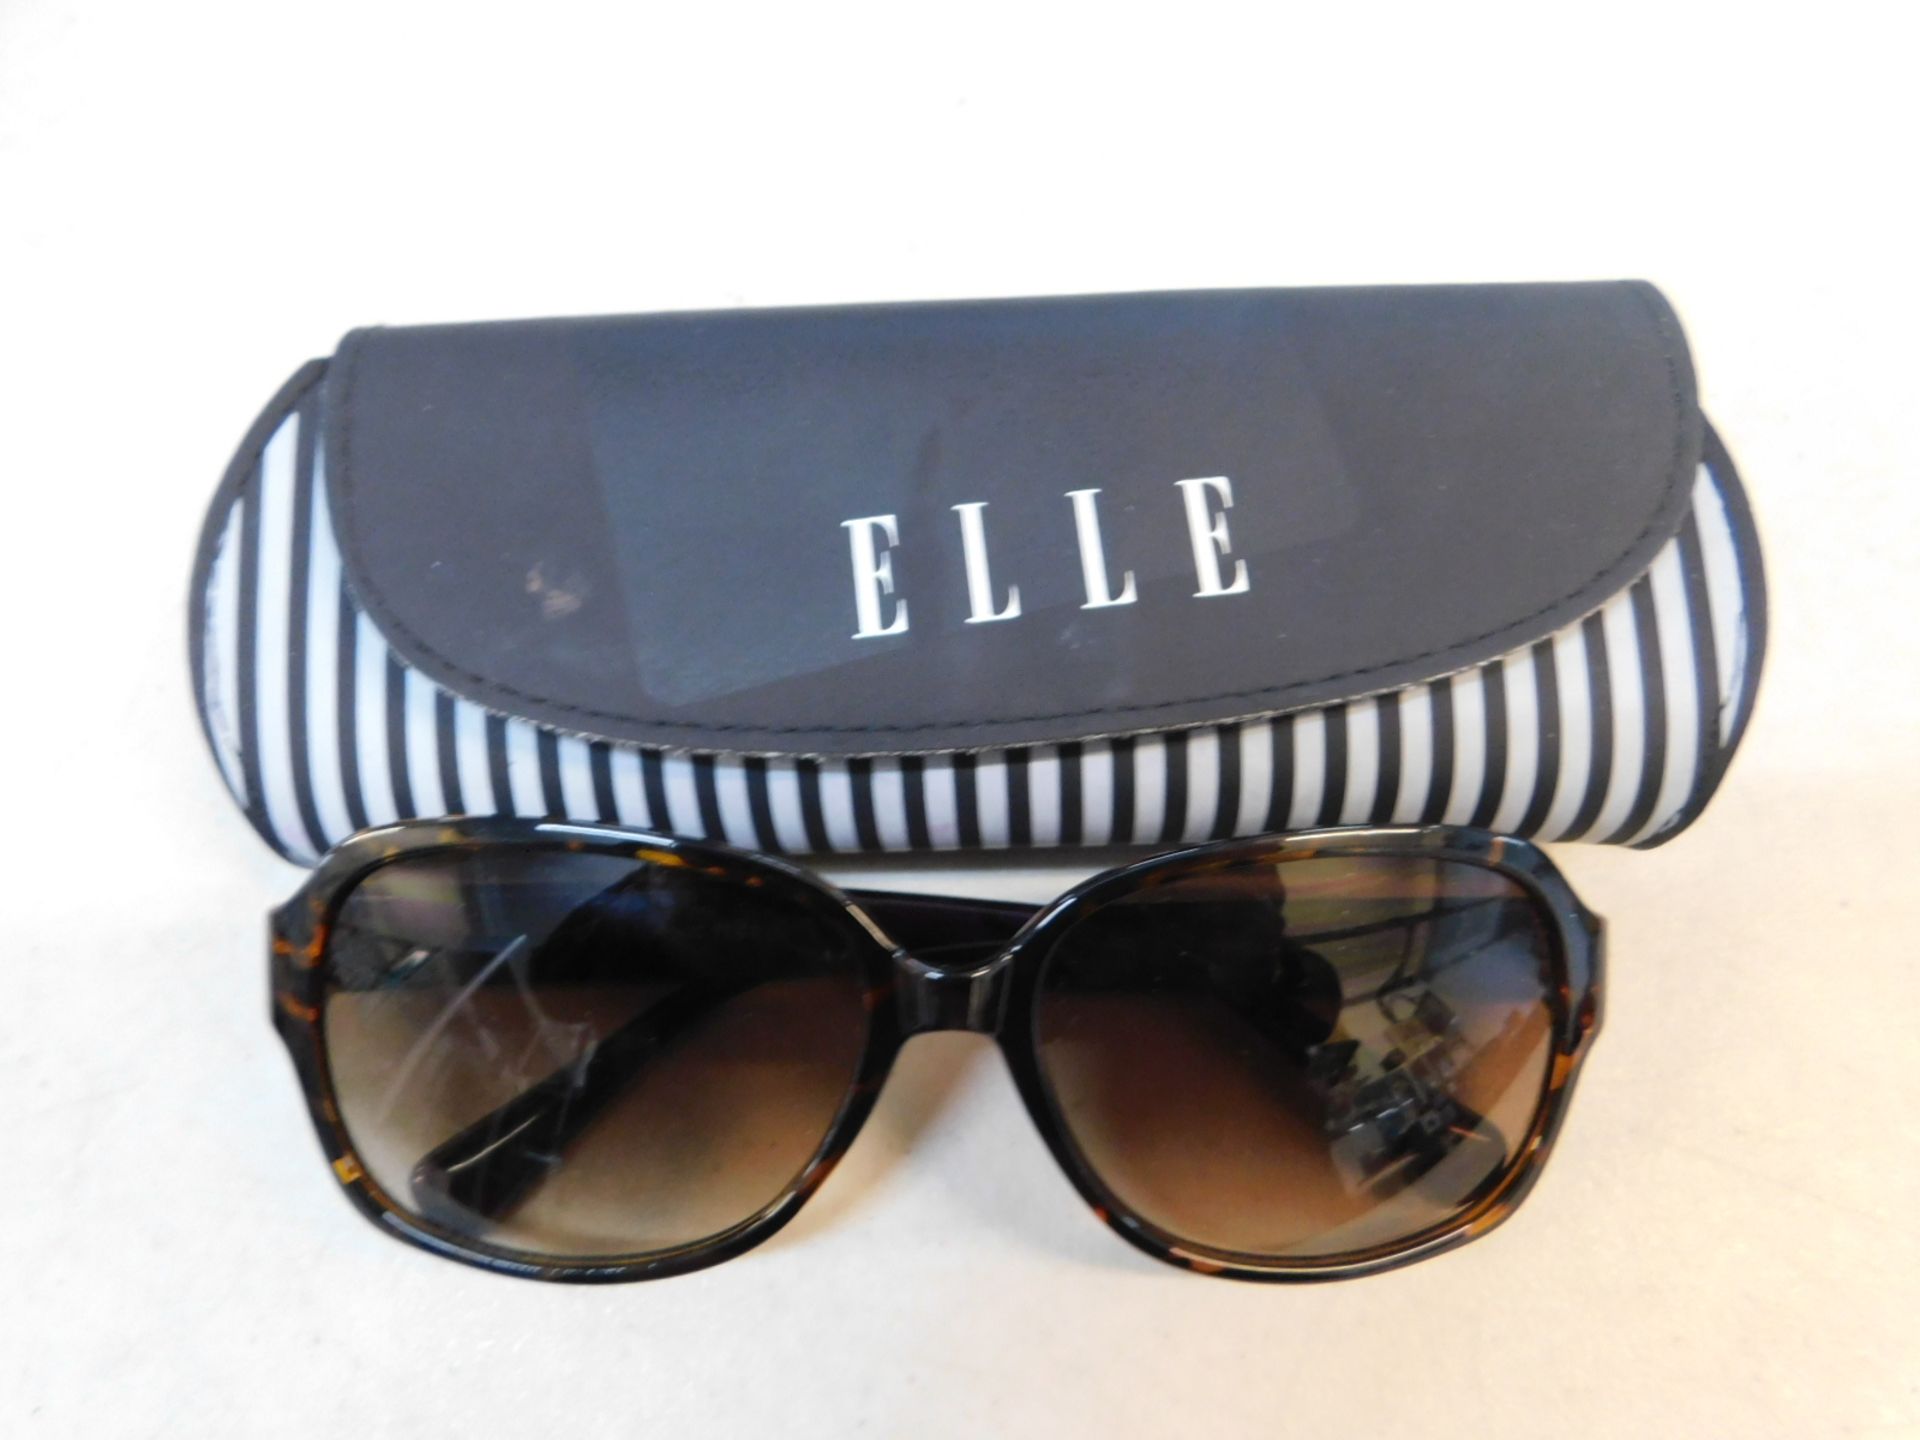 1 PAIR OF ELLE WOMENS SUNGLASSES WITH CASE RRP Â£49